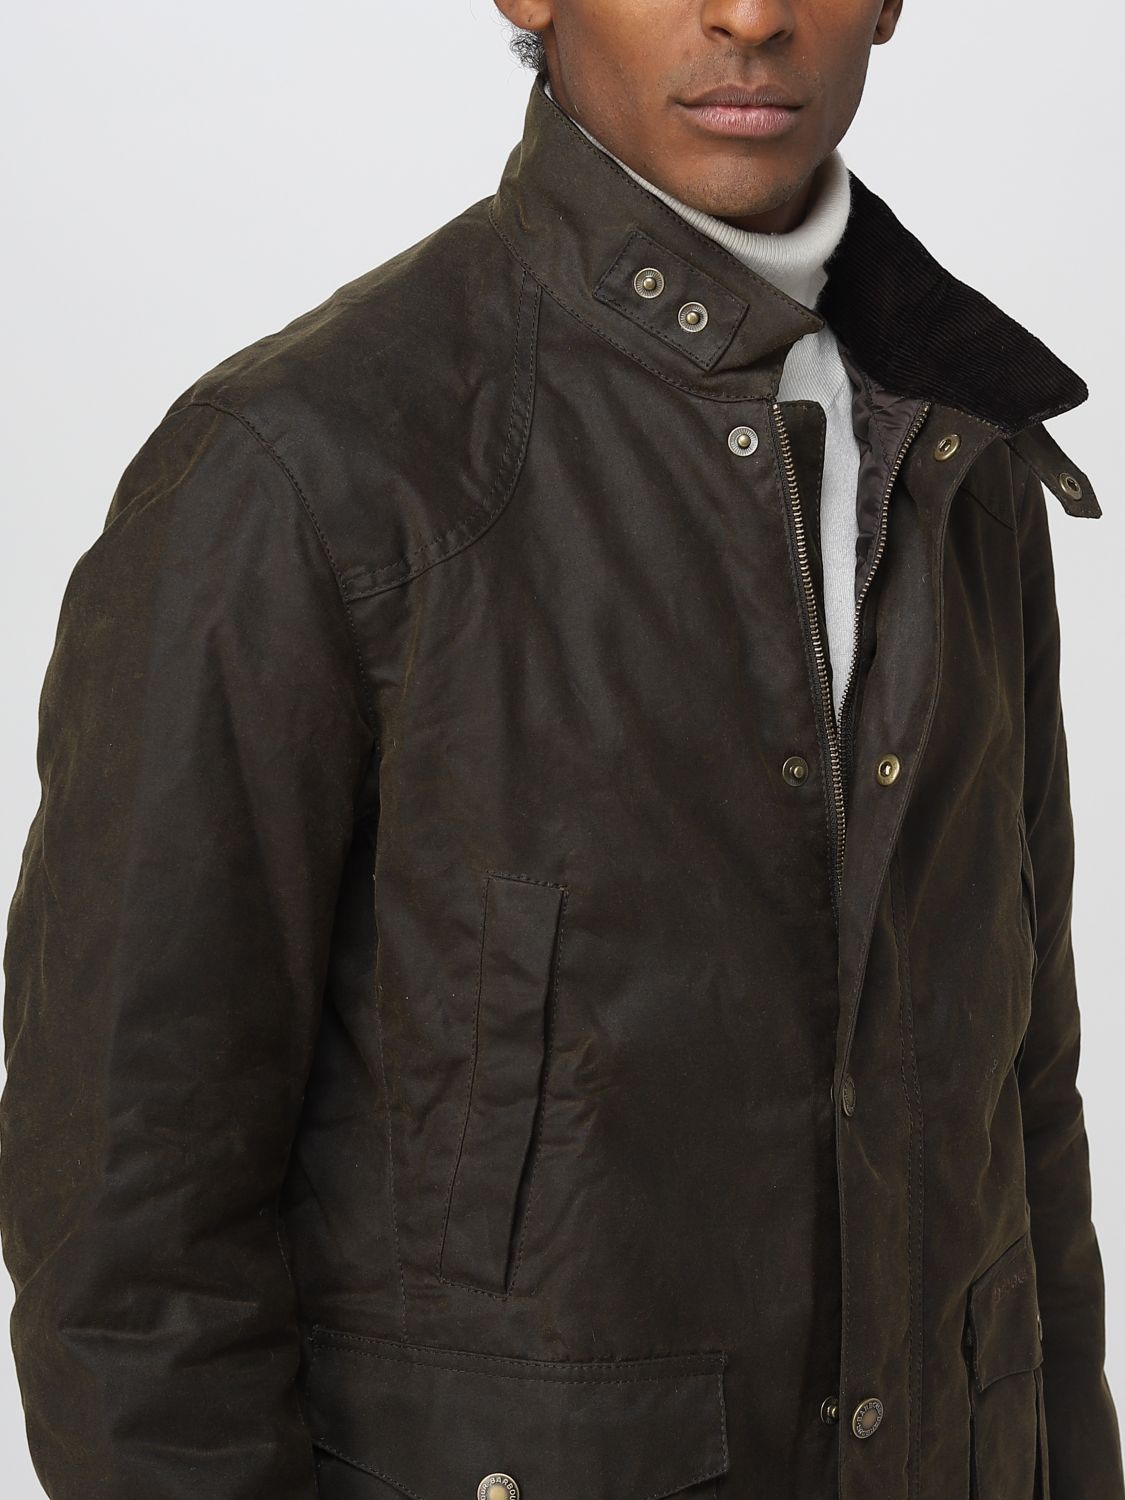 Octrooi thema In hoeveelheid BARBOUR: jacket for man - Olive | Barbour jacket MWX1082 online on  GIGLIO.COM